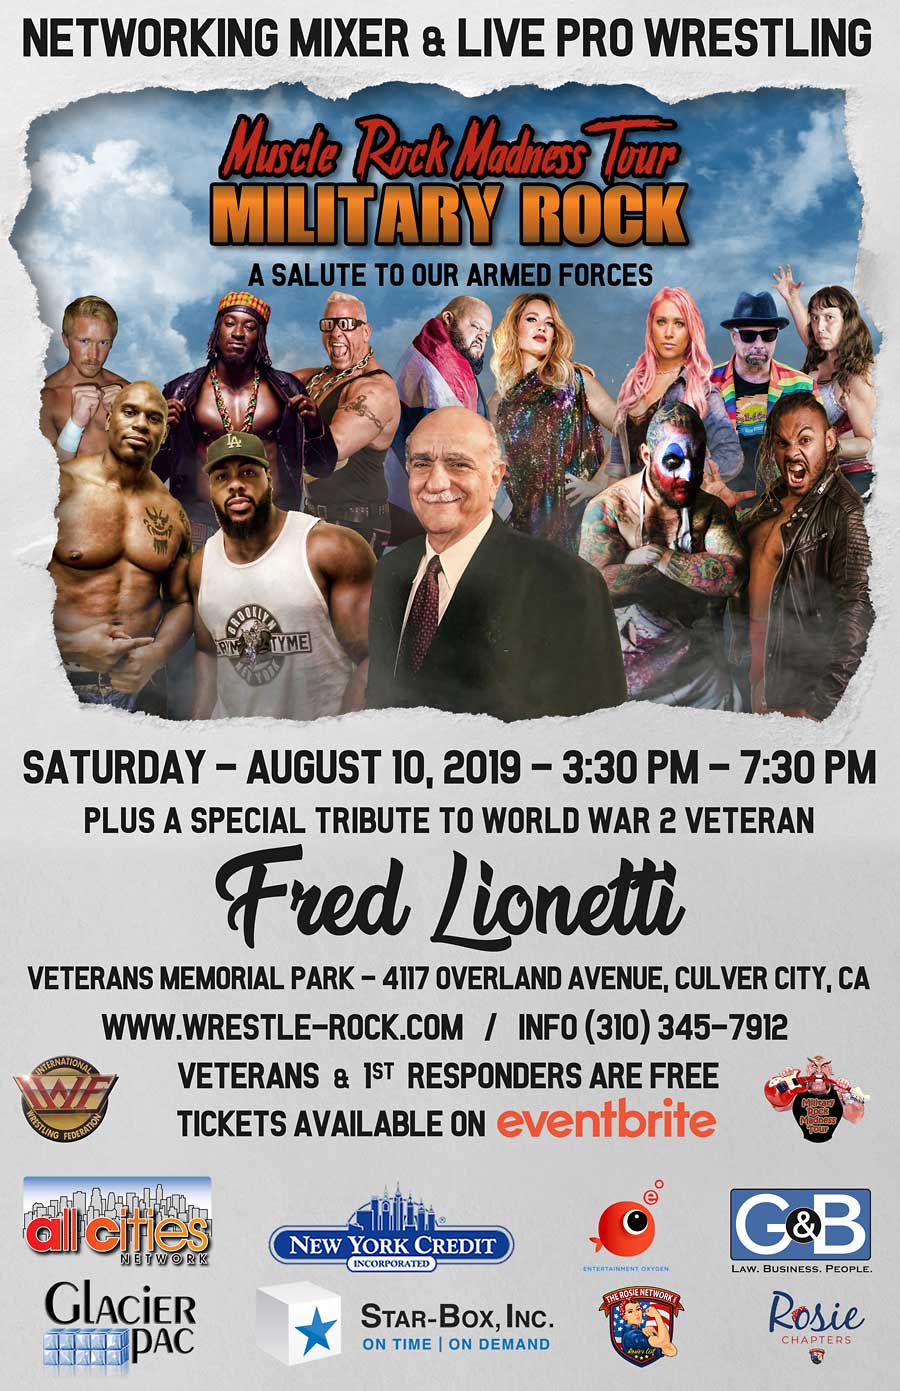 Military Rock Live Pro Wrestling & Concert - August 10th, 2019